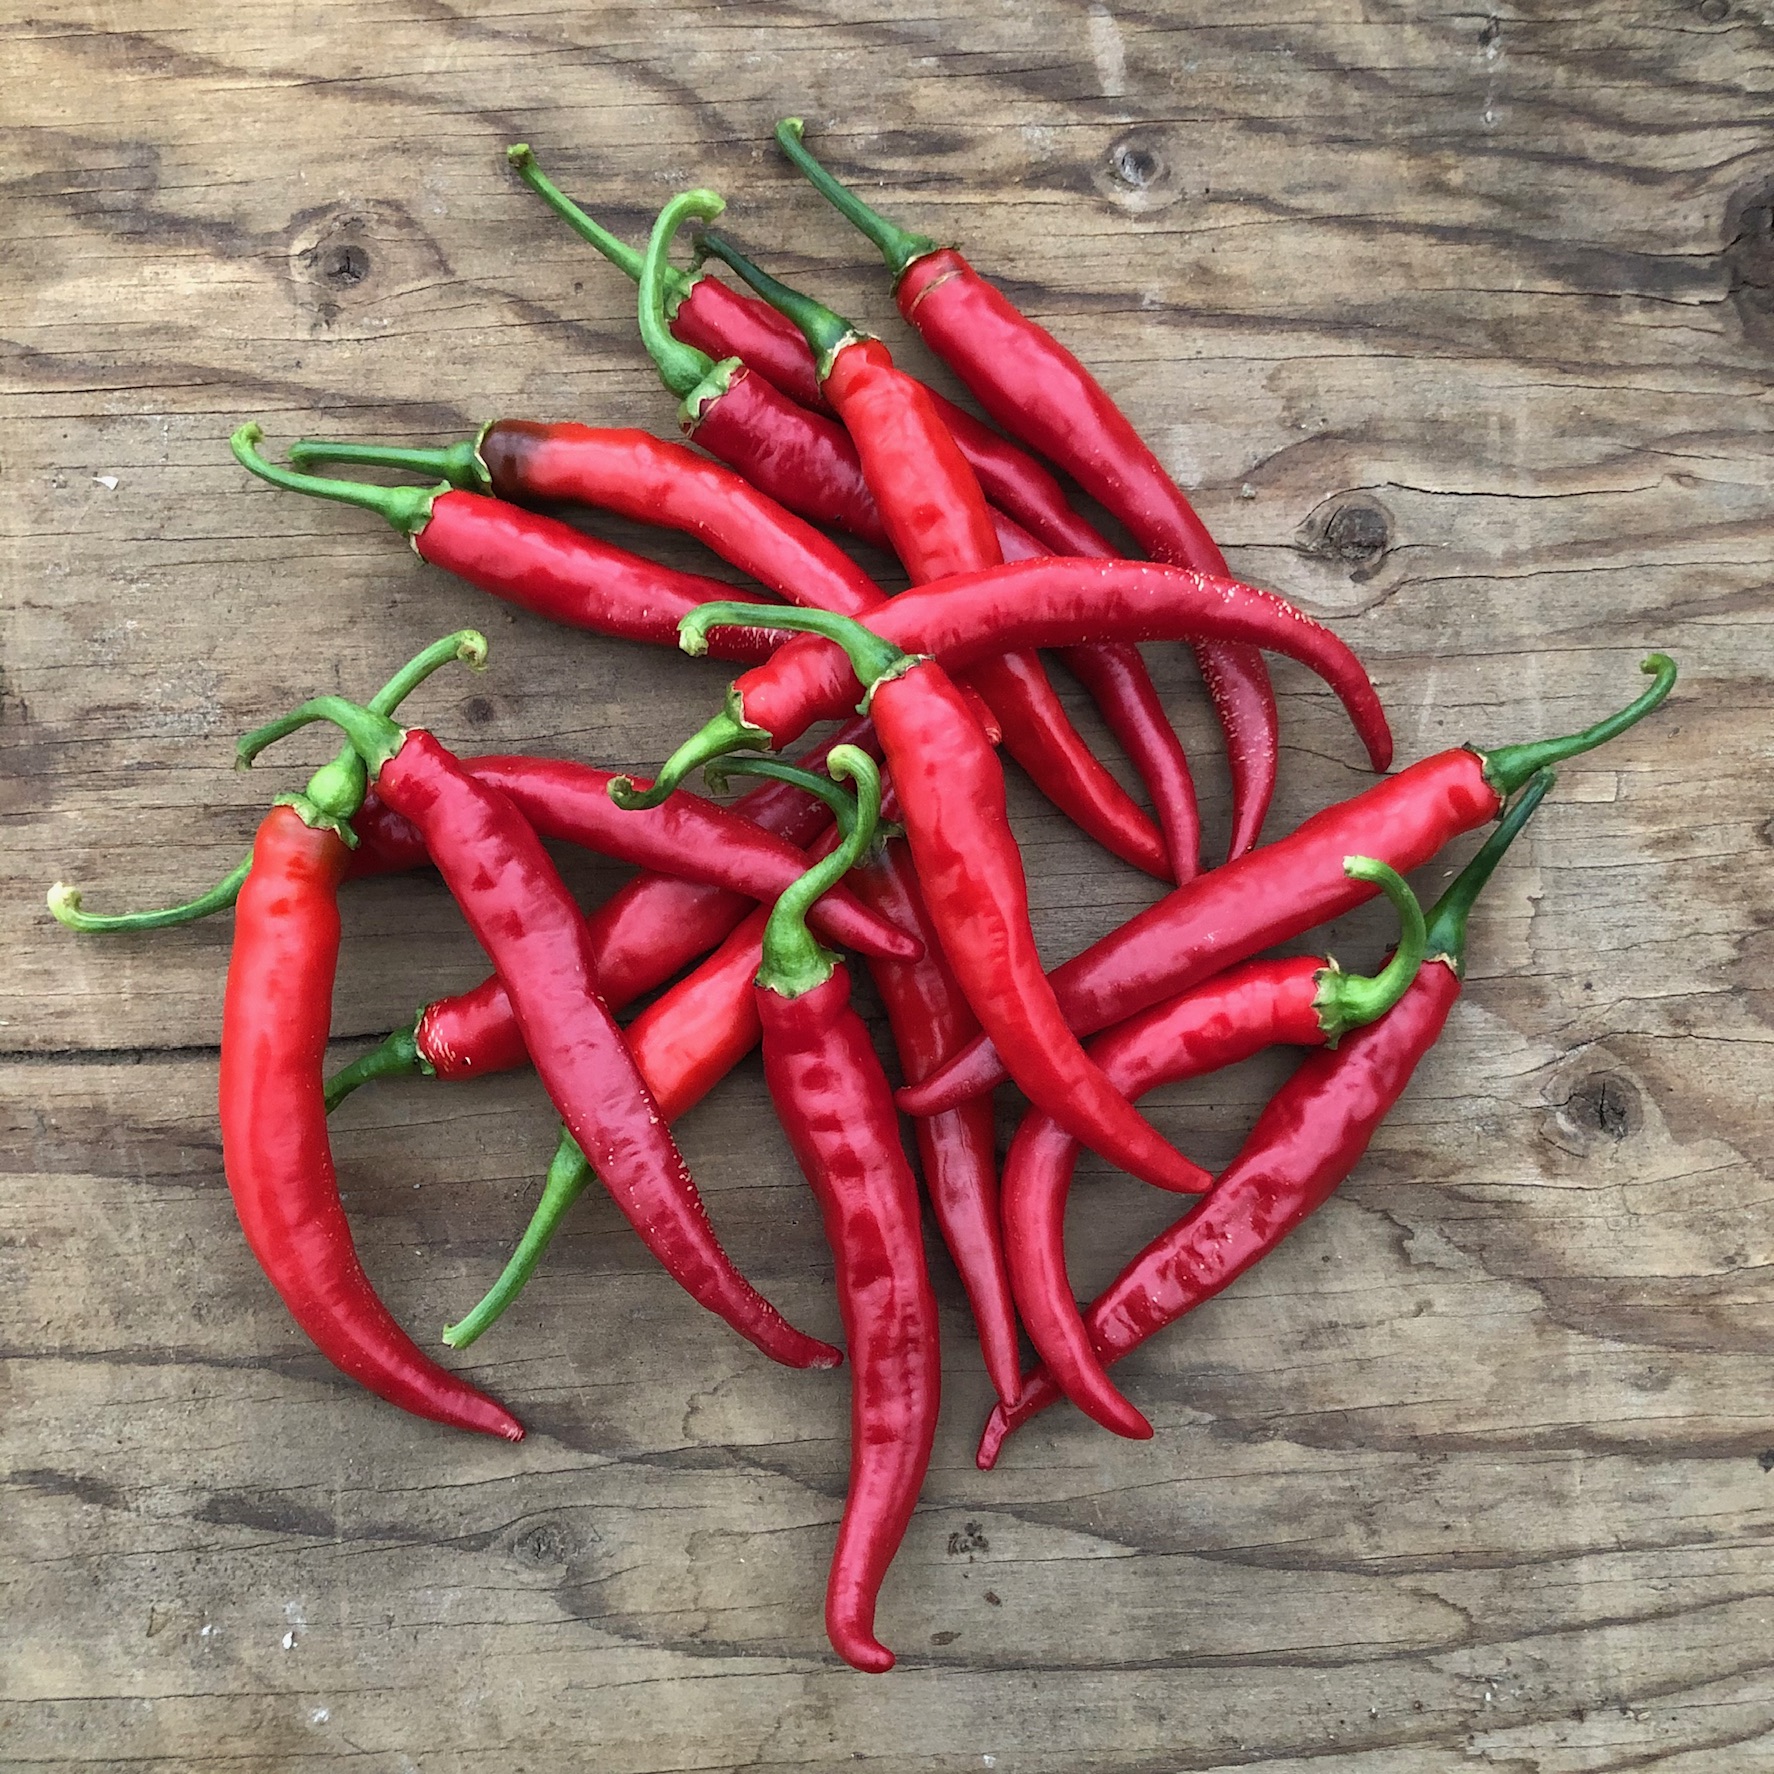 Piment Fort 'Cayenne' / 'Cayenne' Hot Pepper